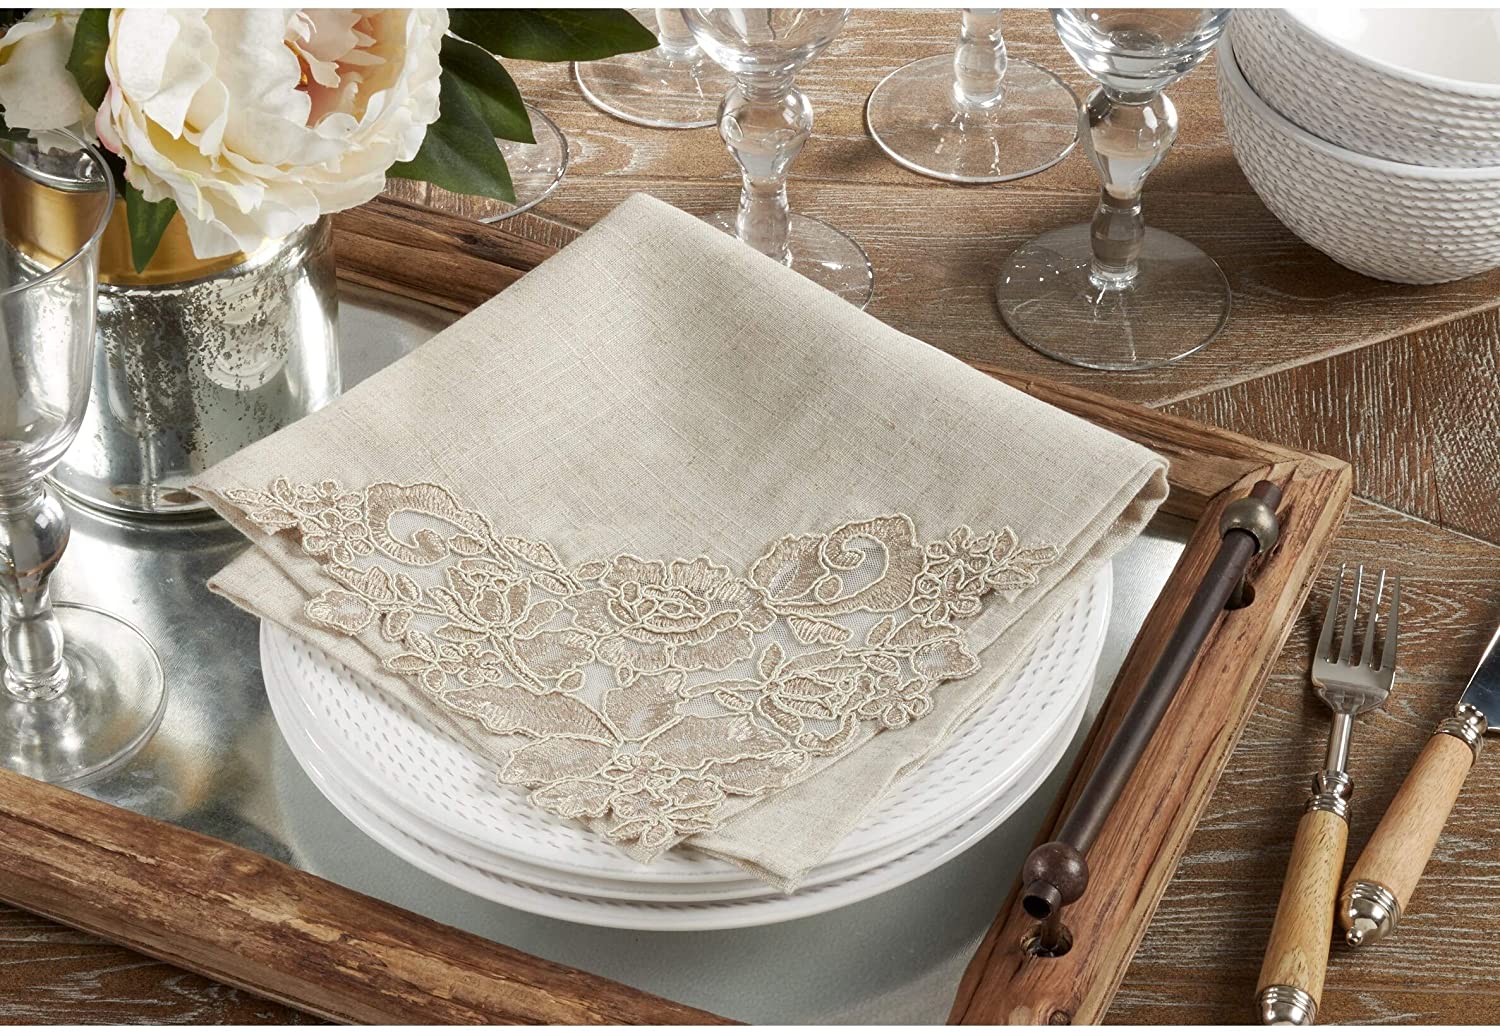 MISC Table Napkin Placemat Set Lace Embroidered Design (1 Placemat Napkin) Tan Oblong Square Polyester